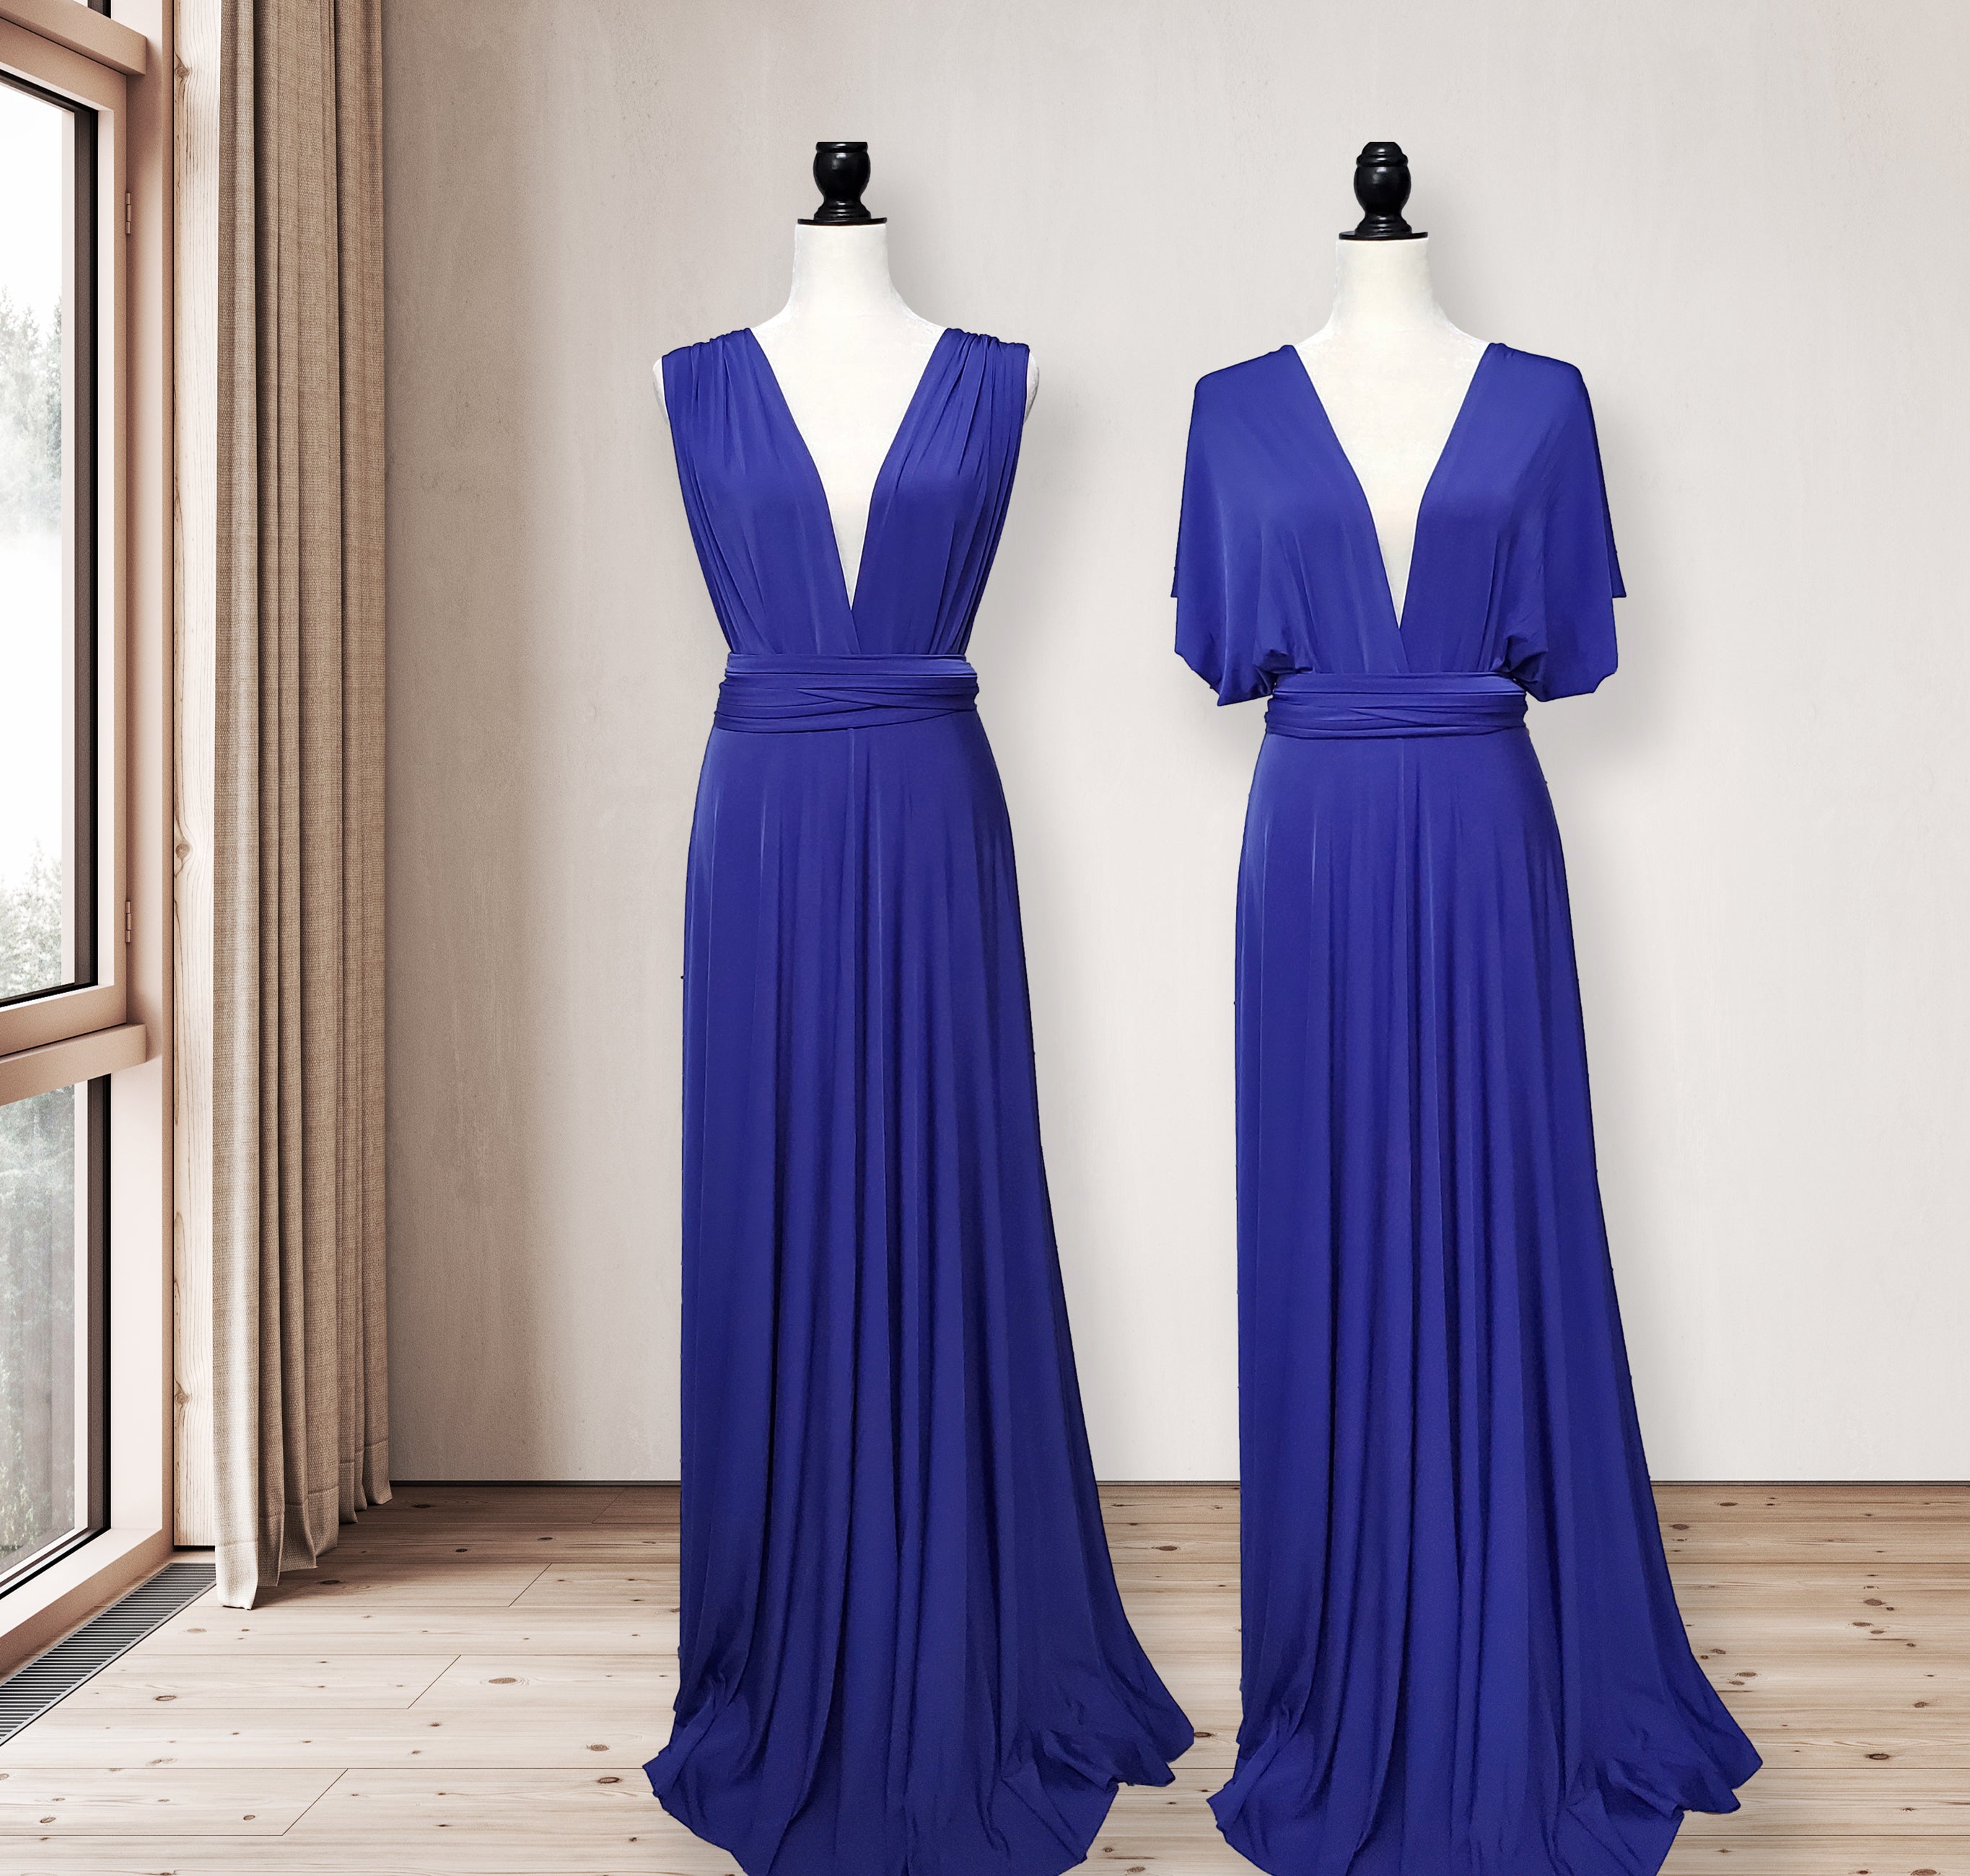 Indigo Blue Infinity Dress Bridesmaid Multiway Convertible Dress Made in USA +36 Colors